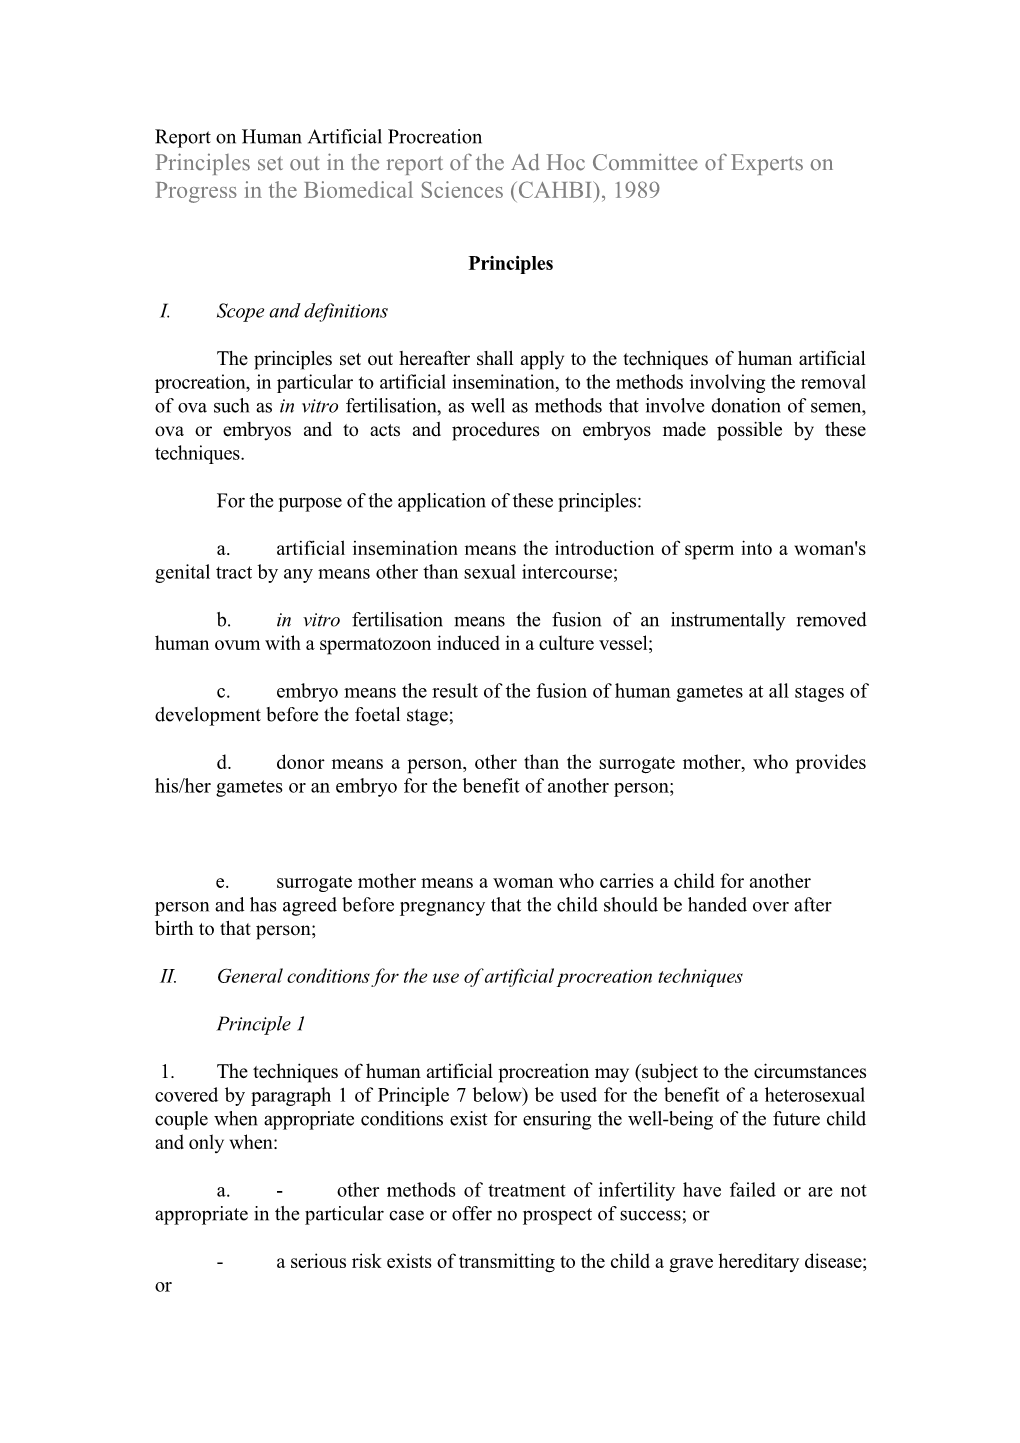 Principles Set out in the Report of the Ad Hoc Committee